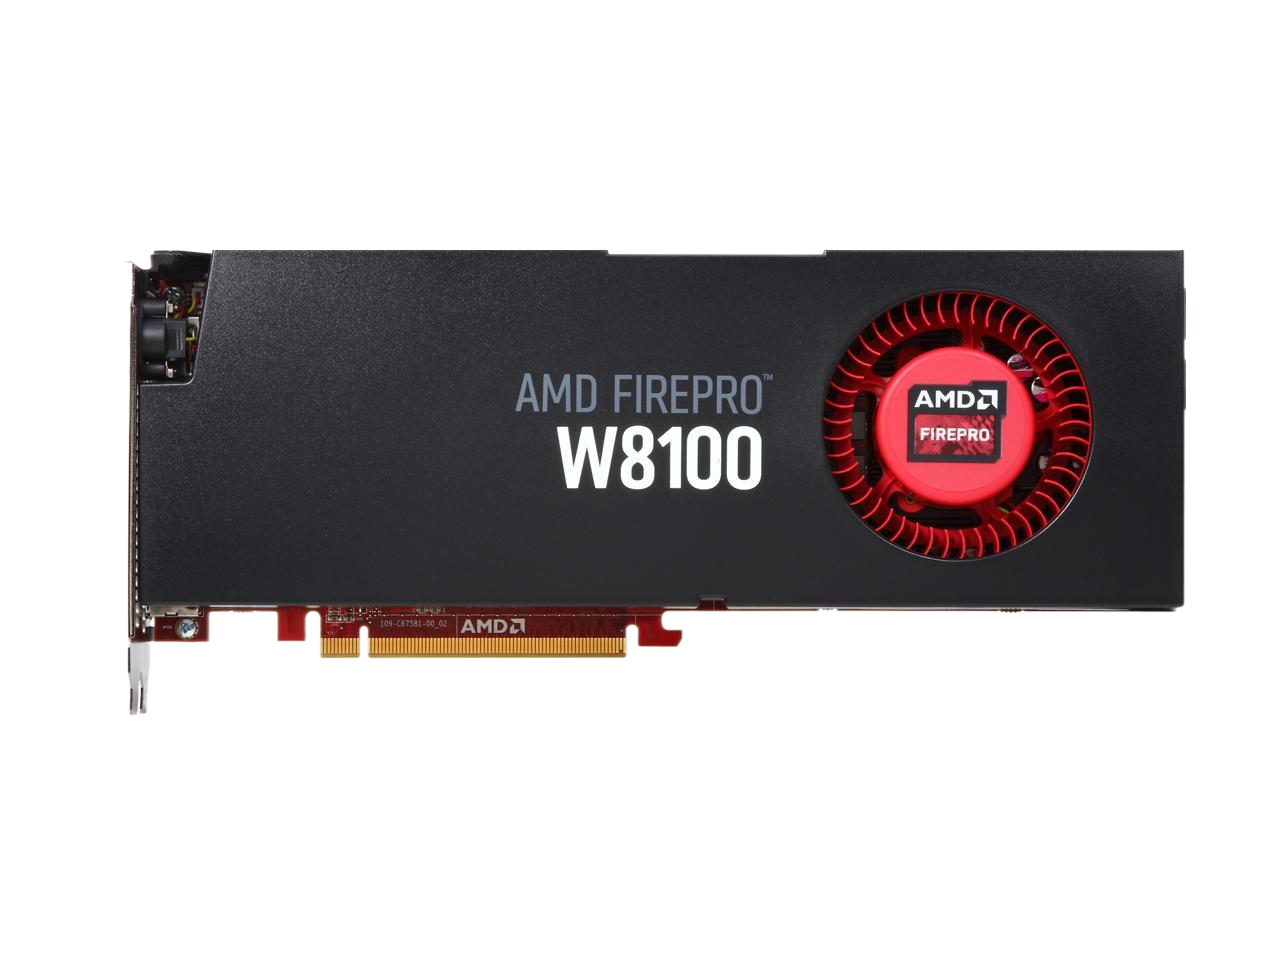 AMD FirePro W8100 8GB 512-bit GDDR5 PCI Express 3.0 x16 CrossFire Supported Workstation Video Card 100-505976